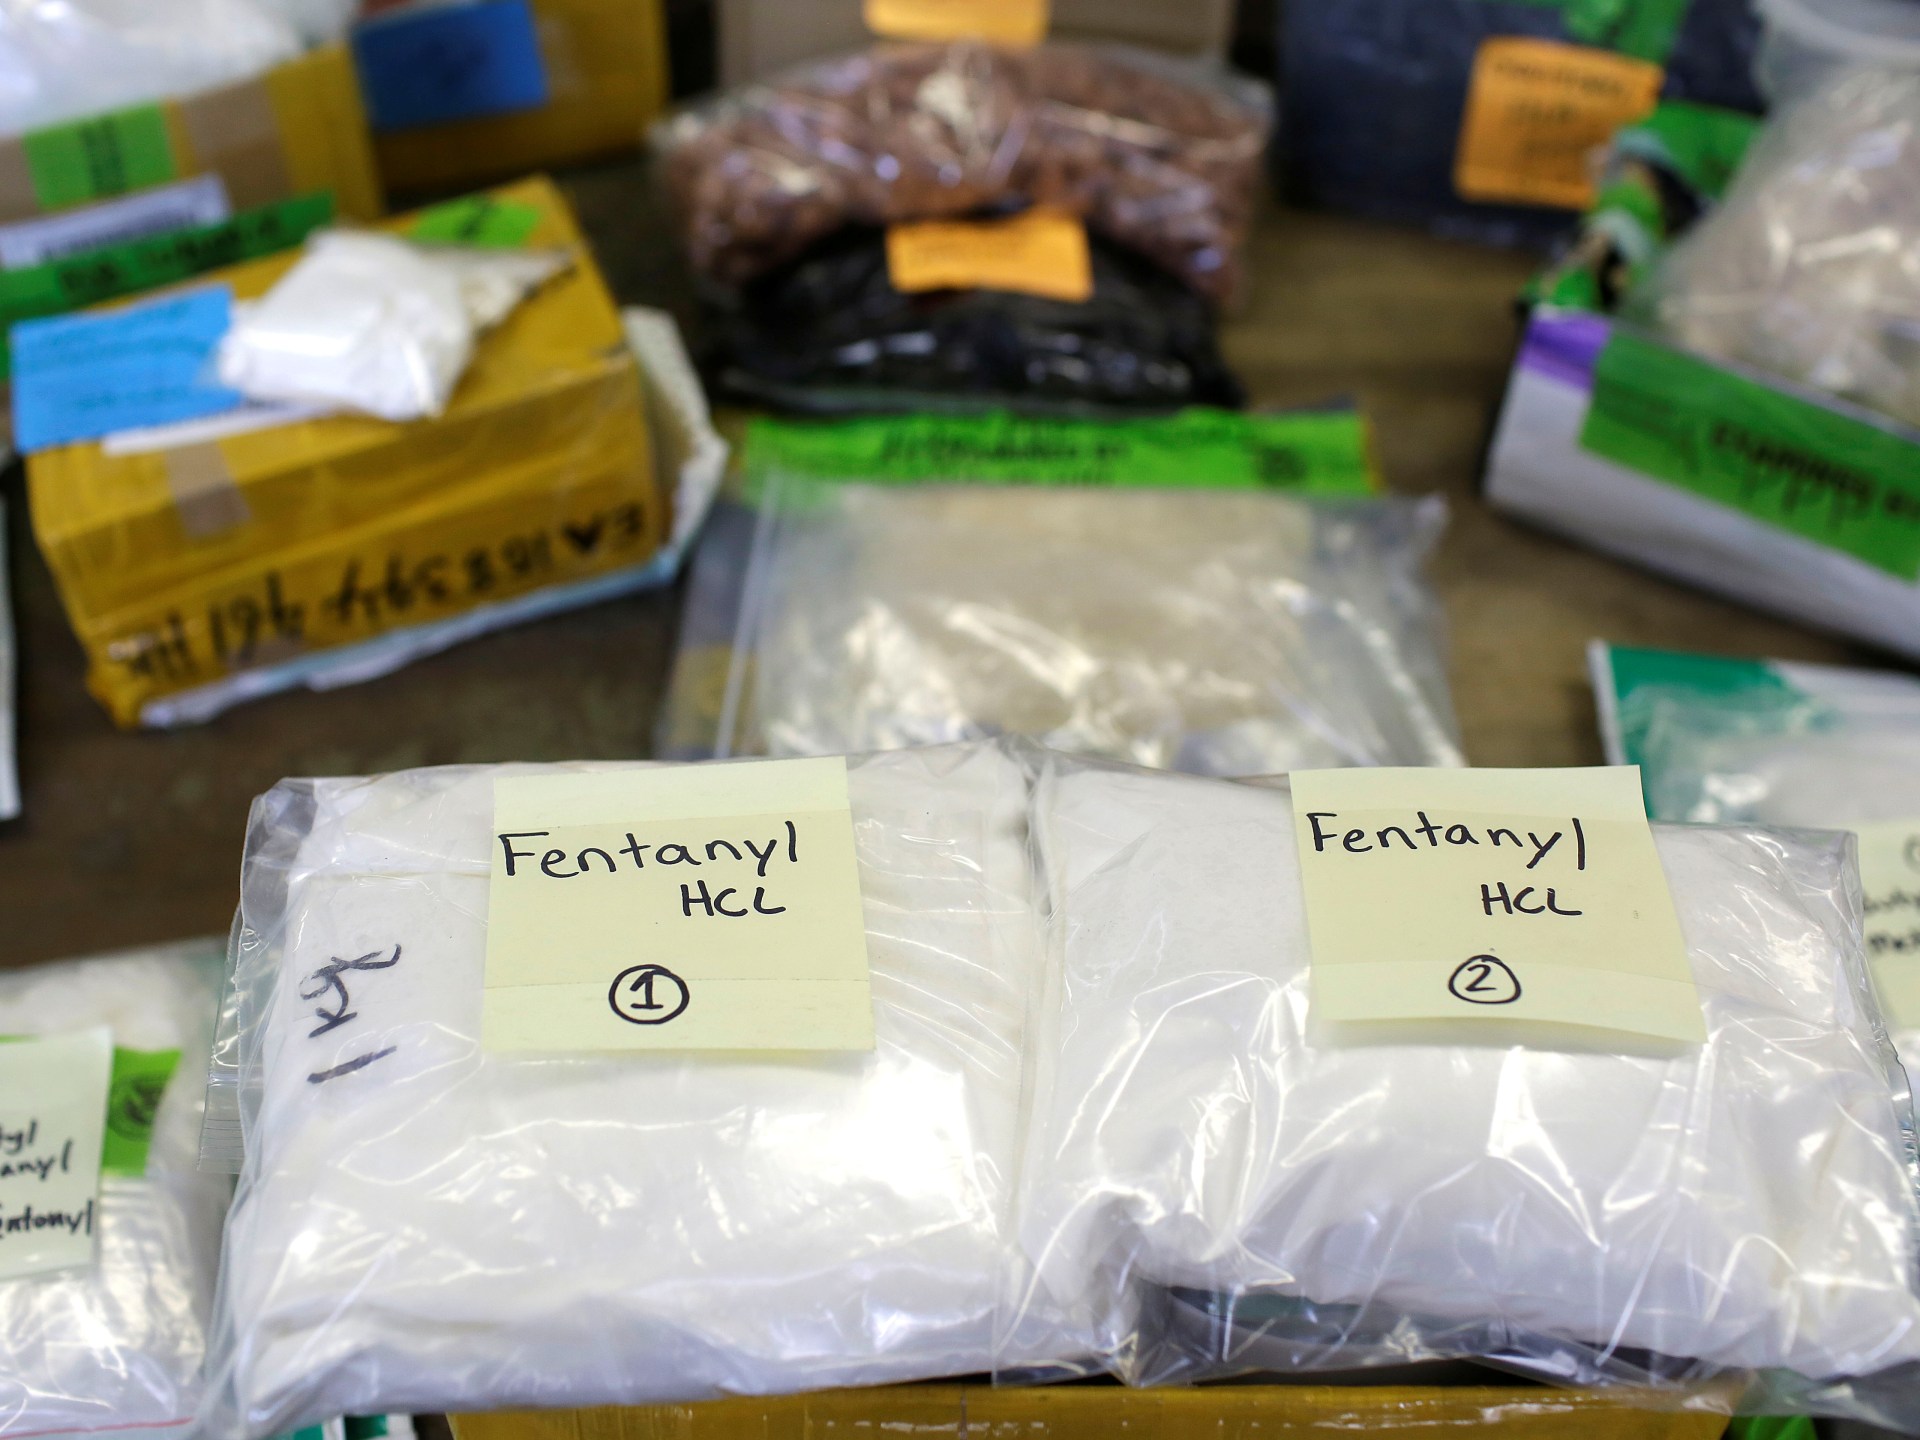 US and China talk on fentanyl trafficking | Drugs News